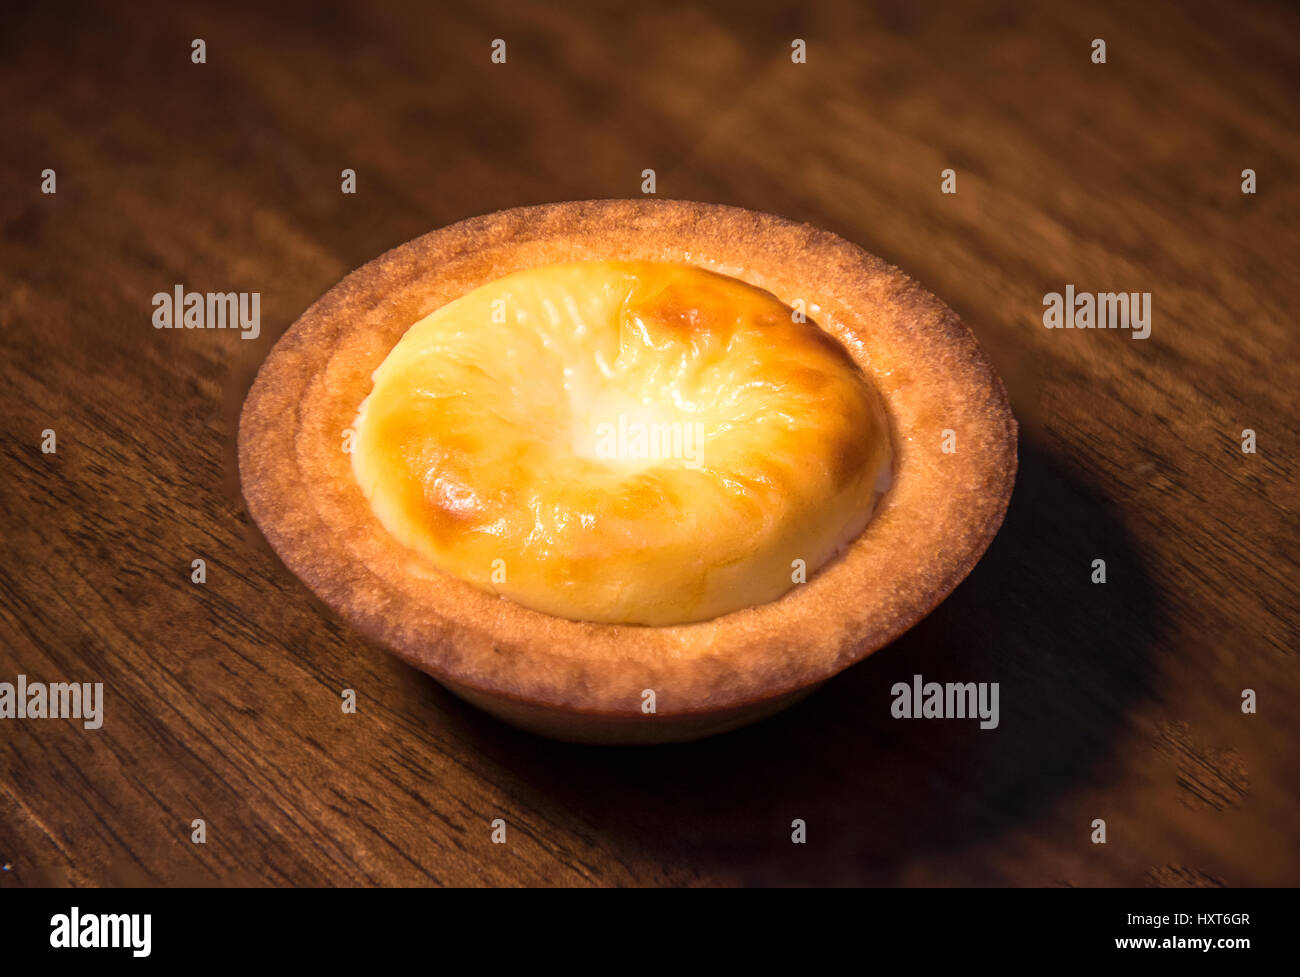 Cheese tart sold in Singapore Stock Photo